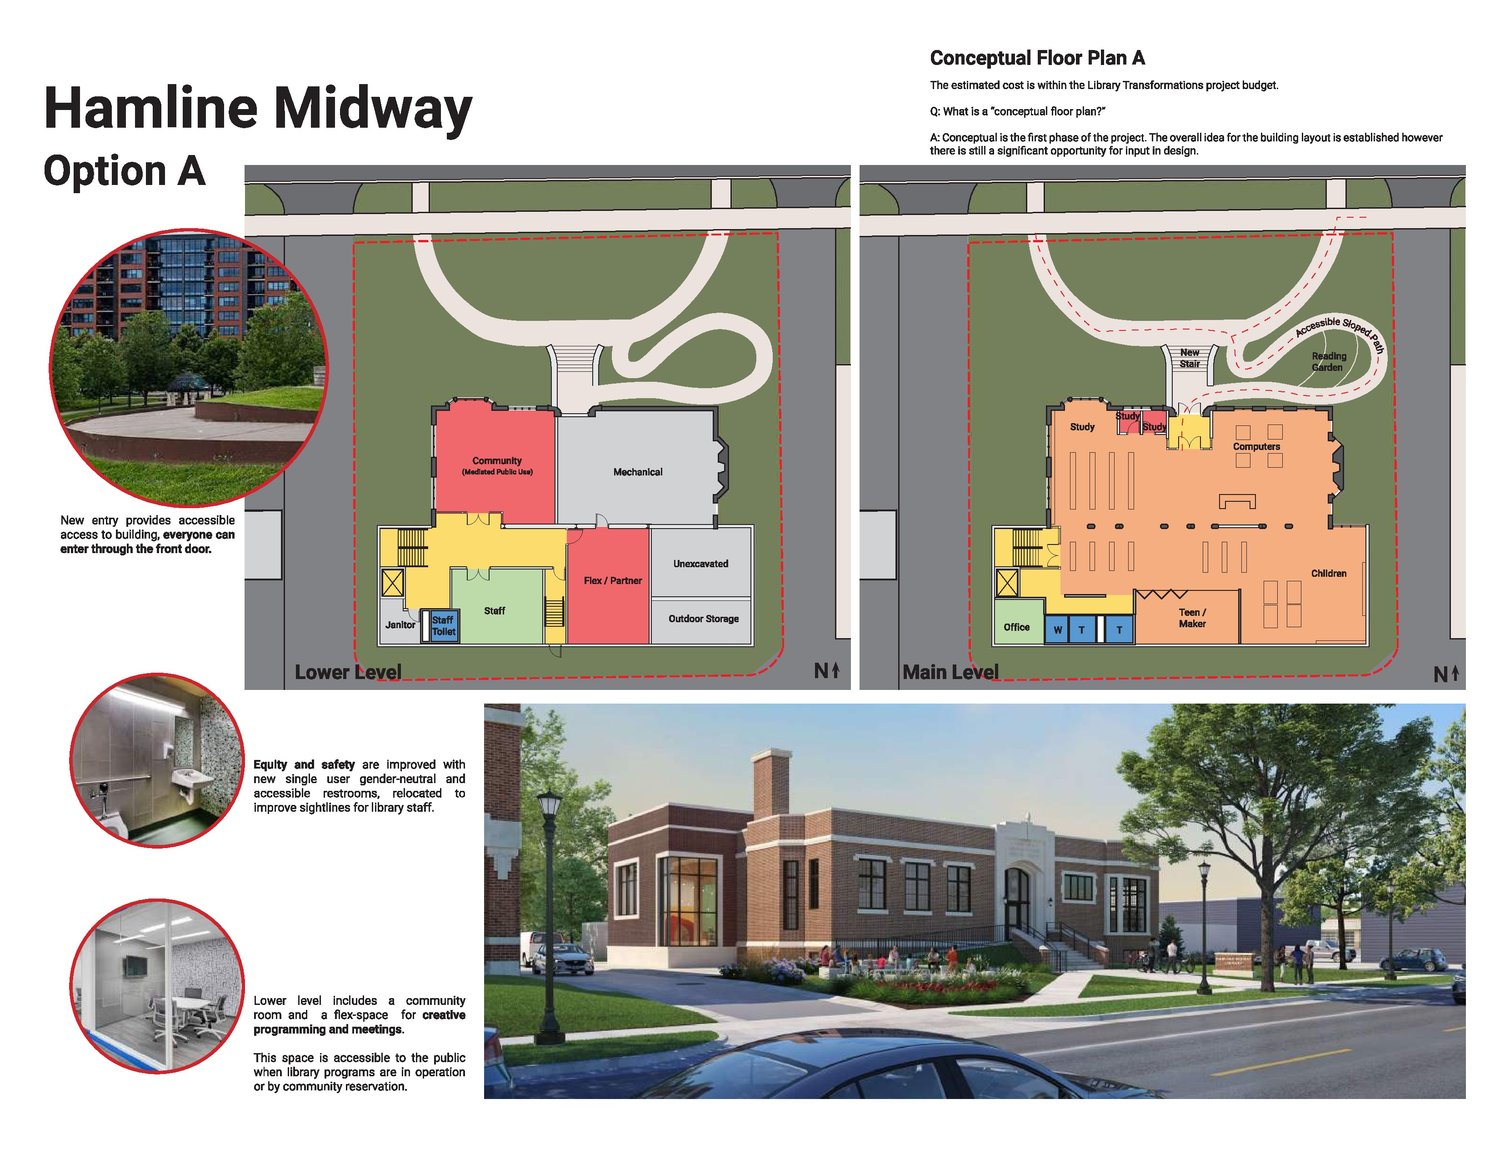 Option A for the Hamline Midway library